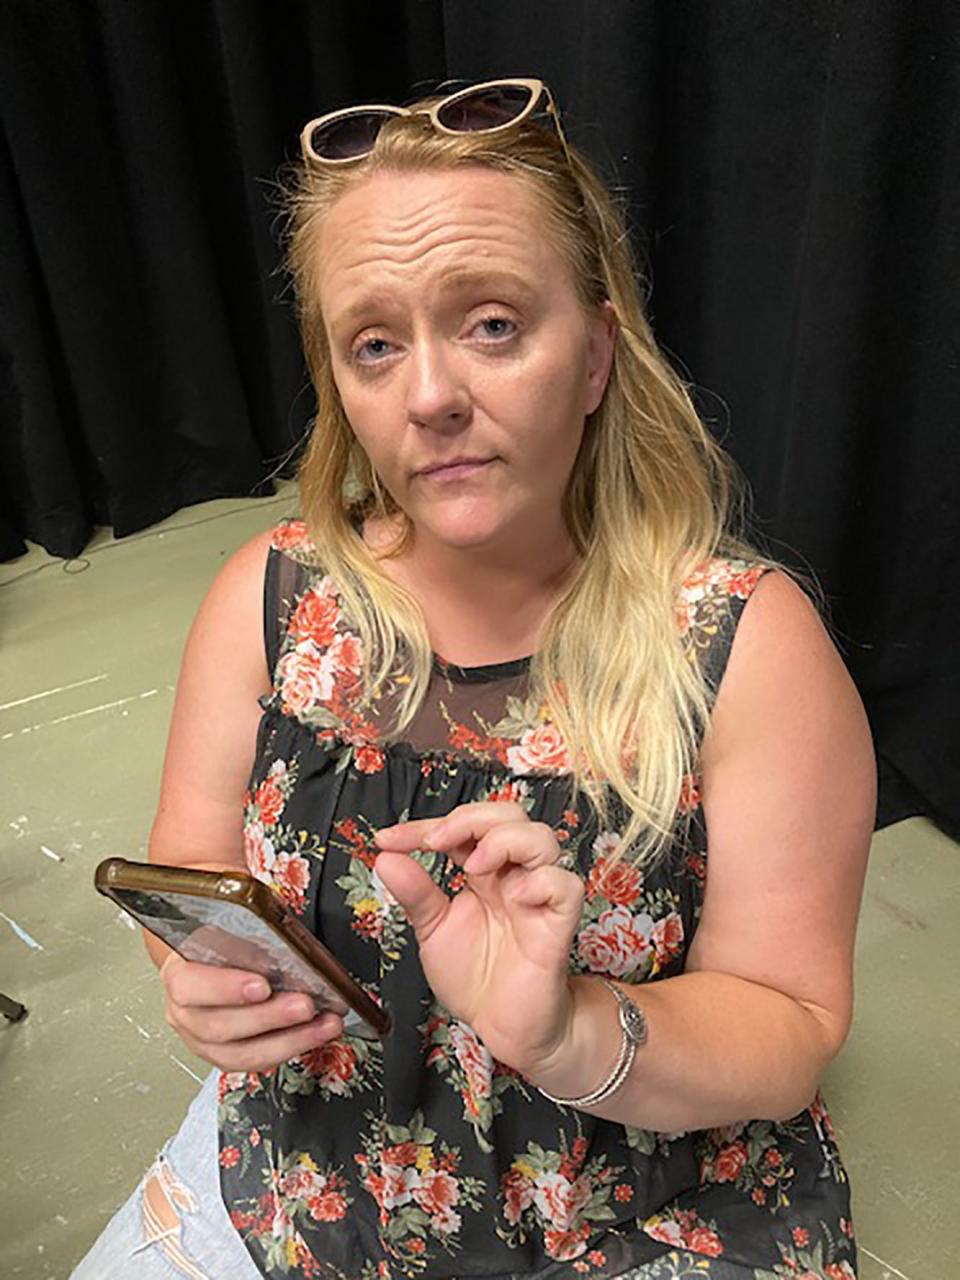 Juror #11 (Carrie Wing) is more interested in messing with her cell phone than she is helping decide the court case to which she has been assigned. And she’s not the only member of the zany jury to engage in annoying habits in “12 Incompetent Jurors.”